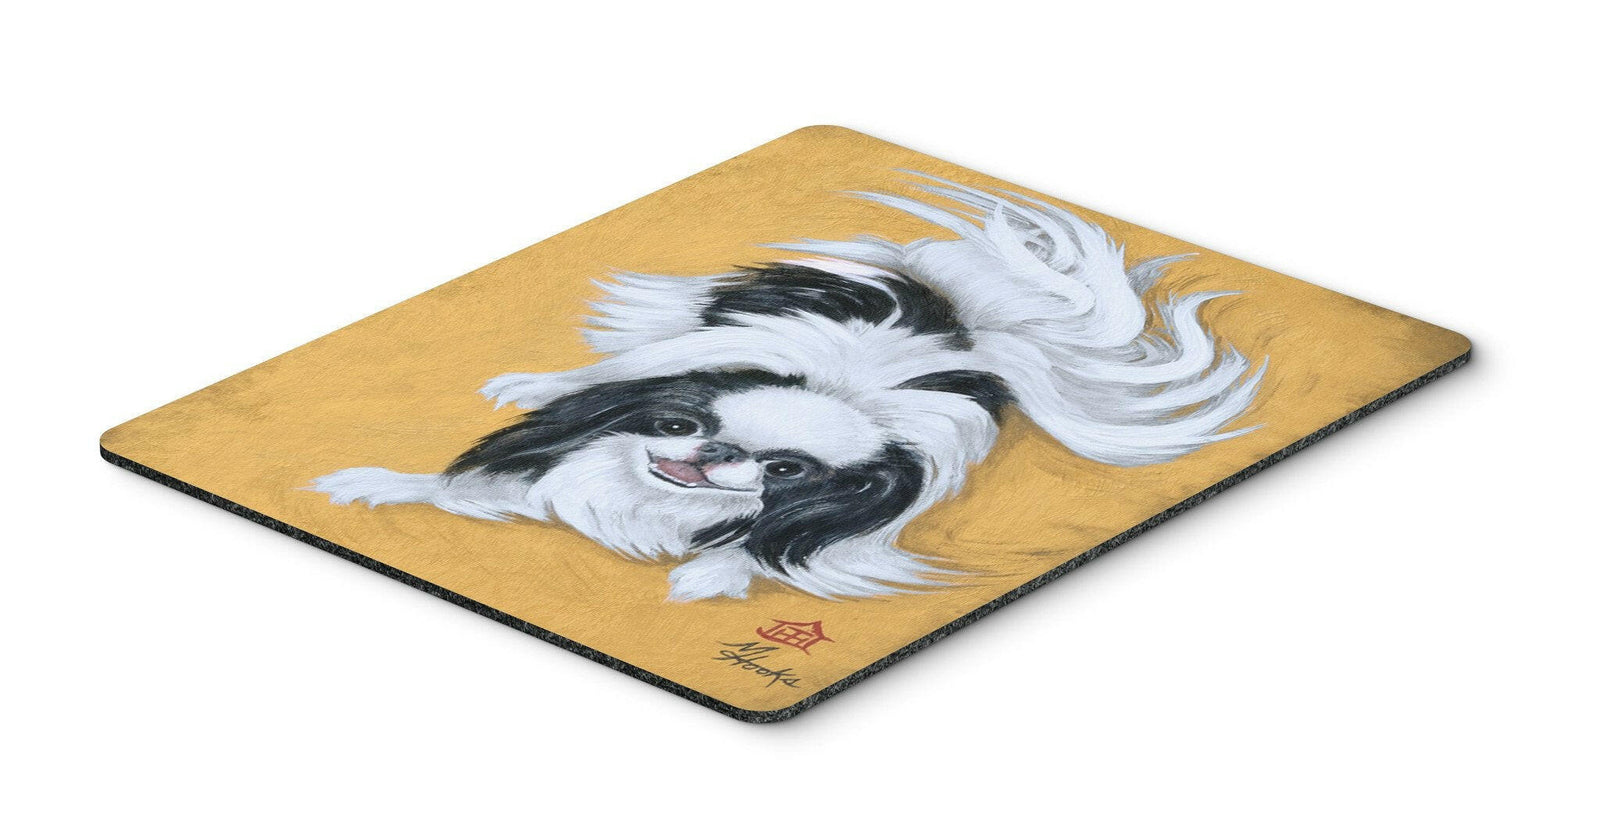 Japanese Chin Black White Play Mouse Pad, Hot Pad or Trivet MH1034MP by Caroline's Treasures